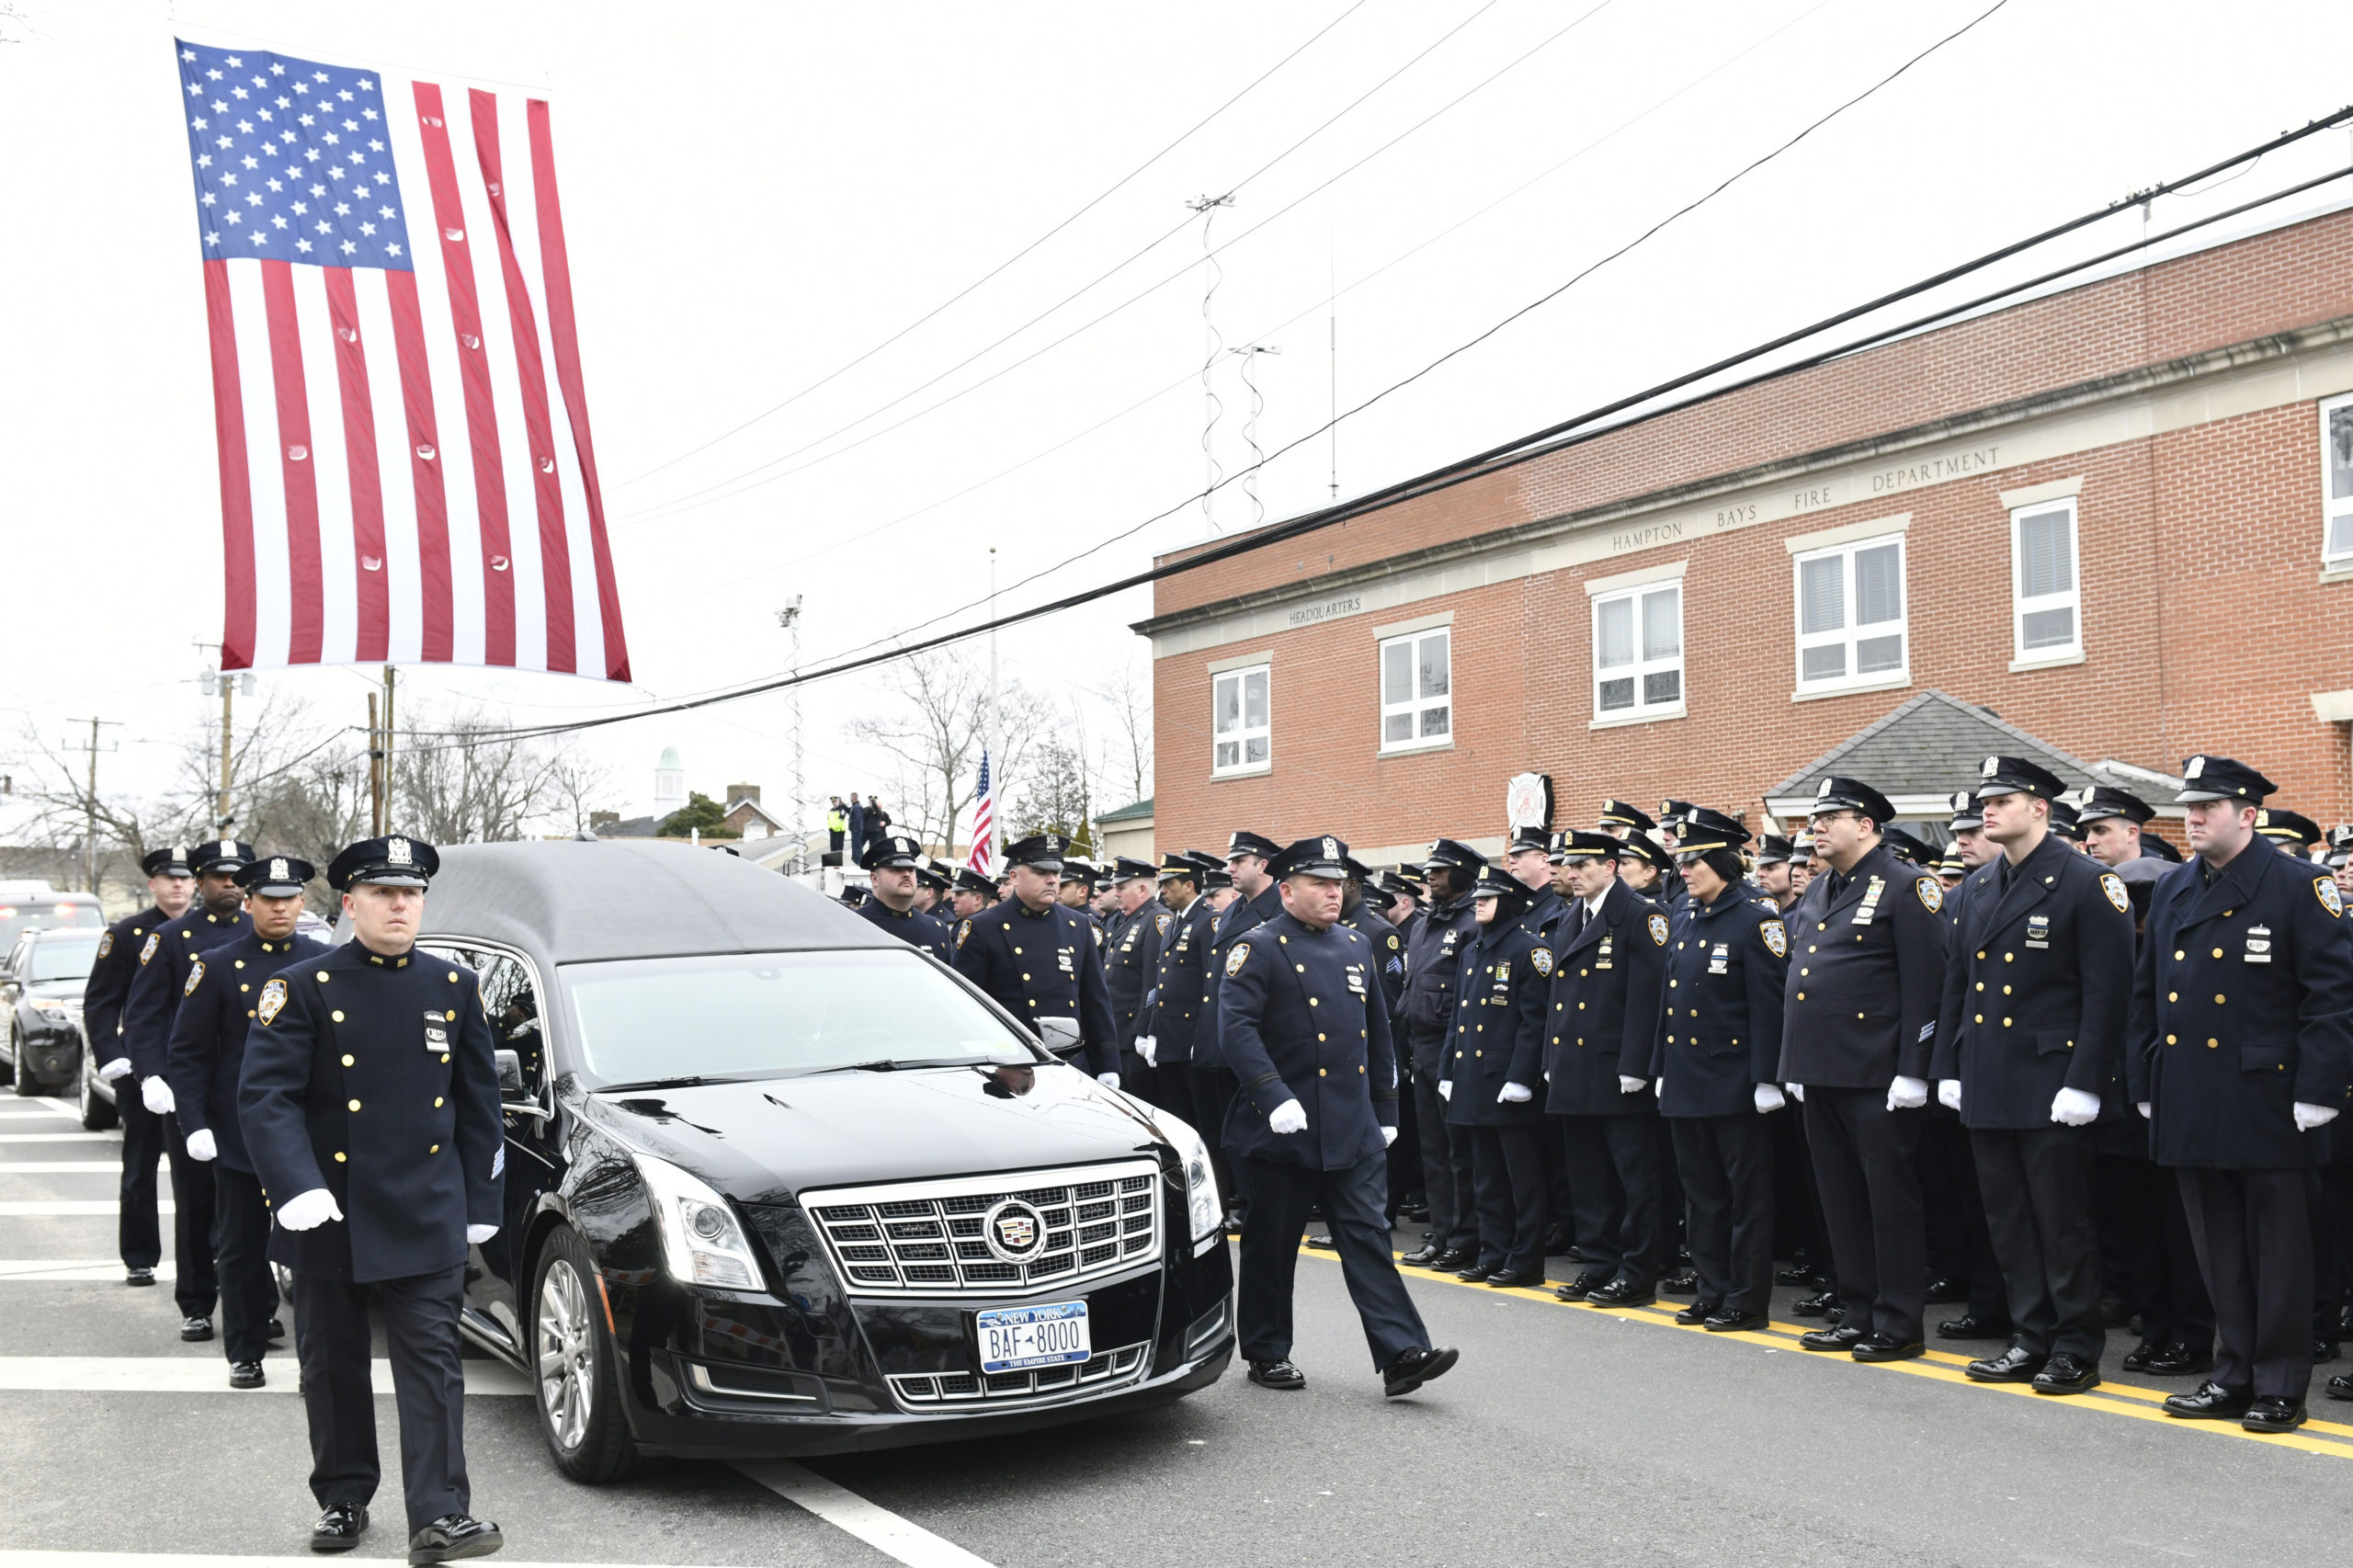 Paying Respect 
January 21 -- Hundreds of police officers from departments across the country turned out on Wednesday for the funeral of New York Police Department Detective Brian Simonsen, 42, a Calverton resident, at St. Rosalie’s Church in Hampton Bays. Det. Simonsen was killed on February 12 when he and six other officers responded to an armed robbery in Queens.